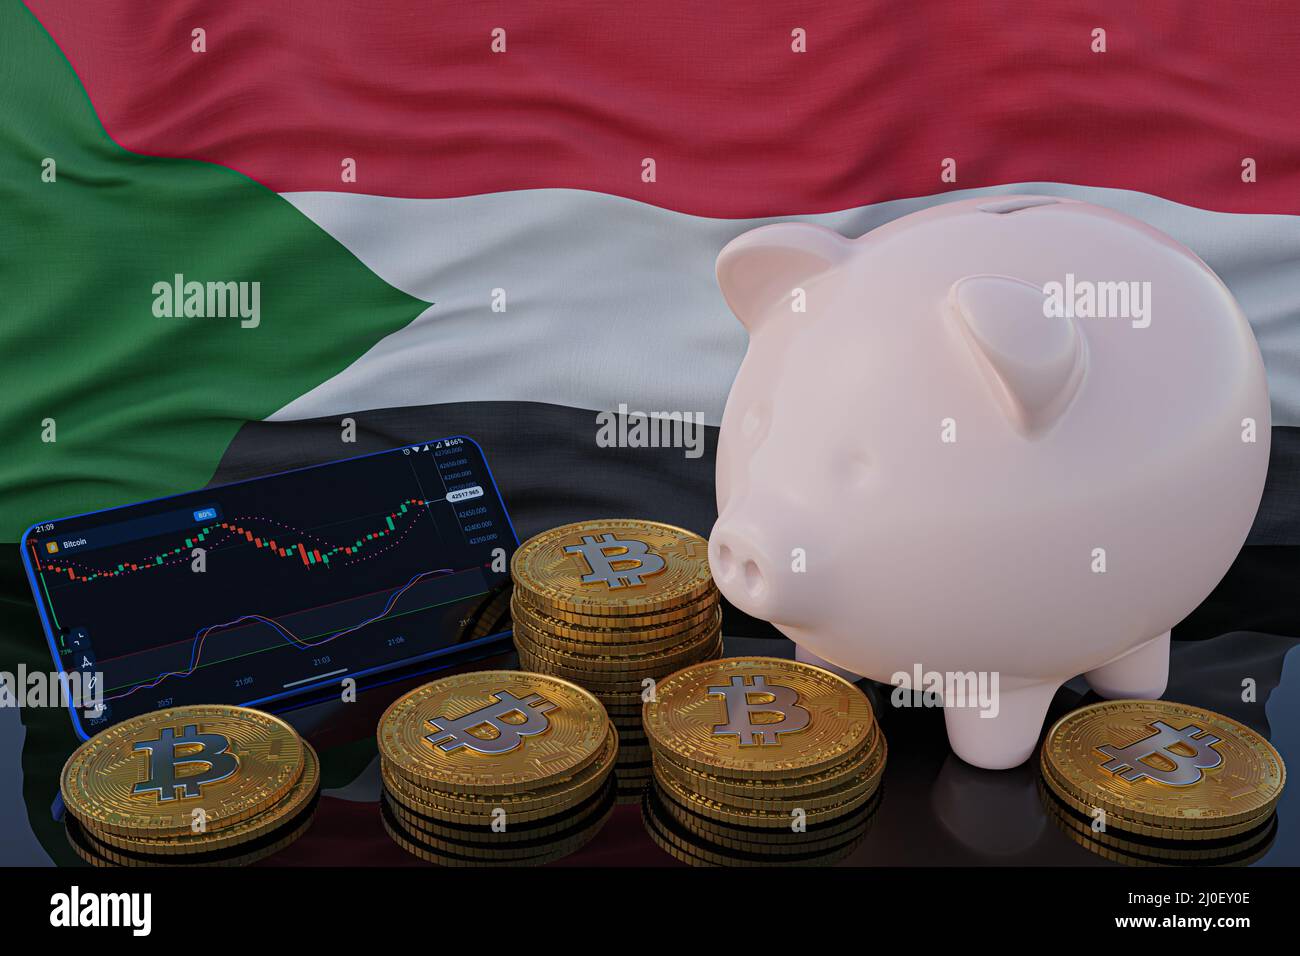 Bitcoin and cryptocurrency investing. Sudan flag in background. Piggy bank, the of saving concept. Mobile application for trading on stock. 3d render Stock Photo